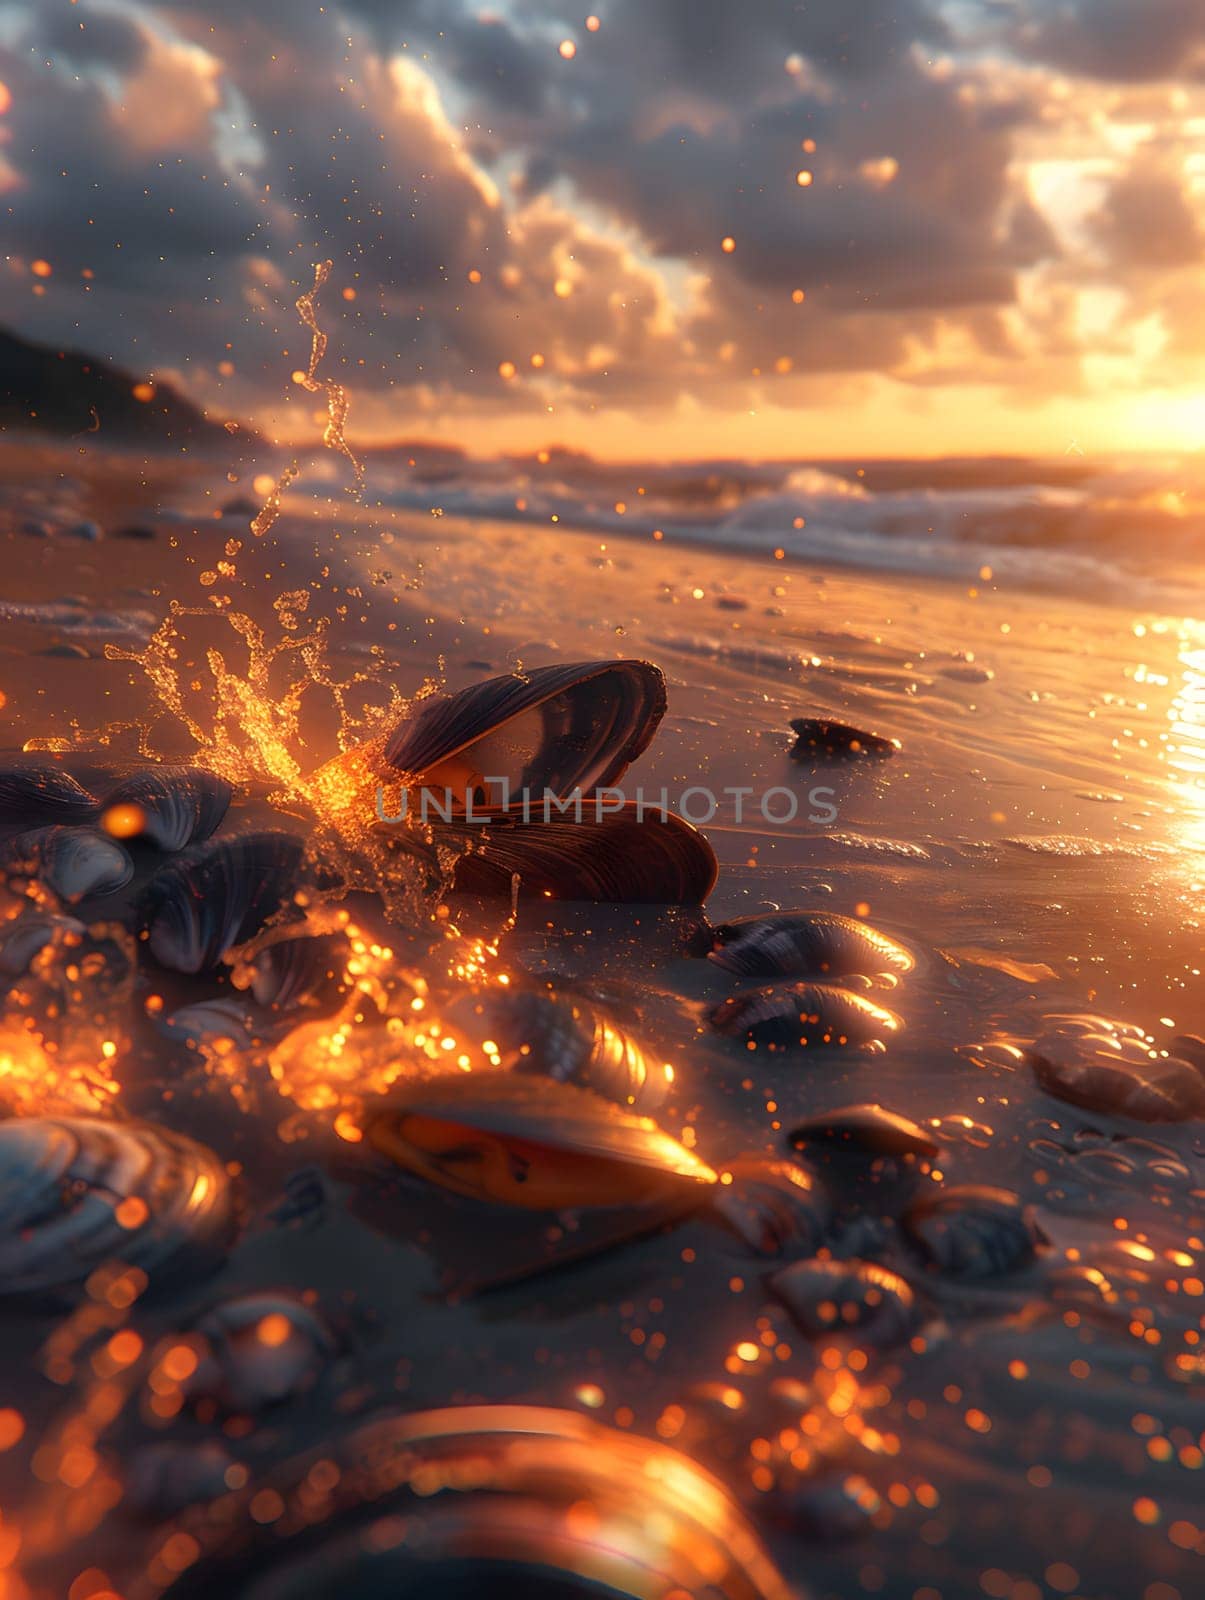 A rocky beach at dusk with an amber afterglow in the sky by Nadtochiy